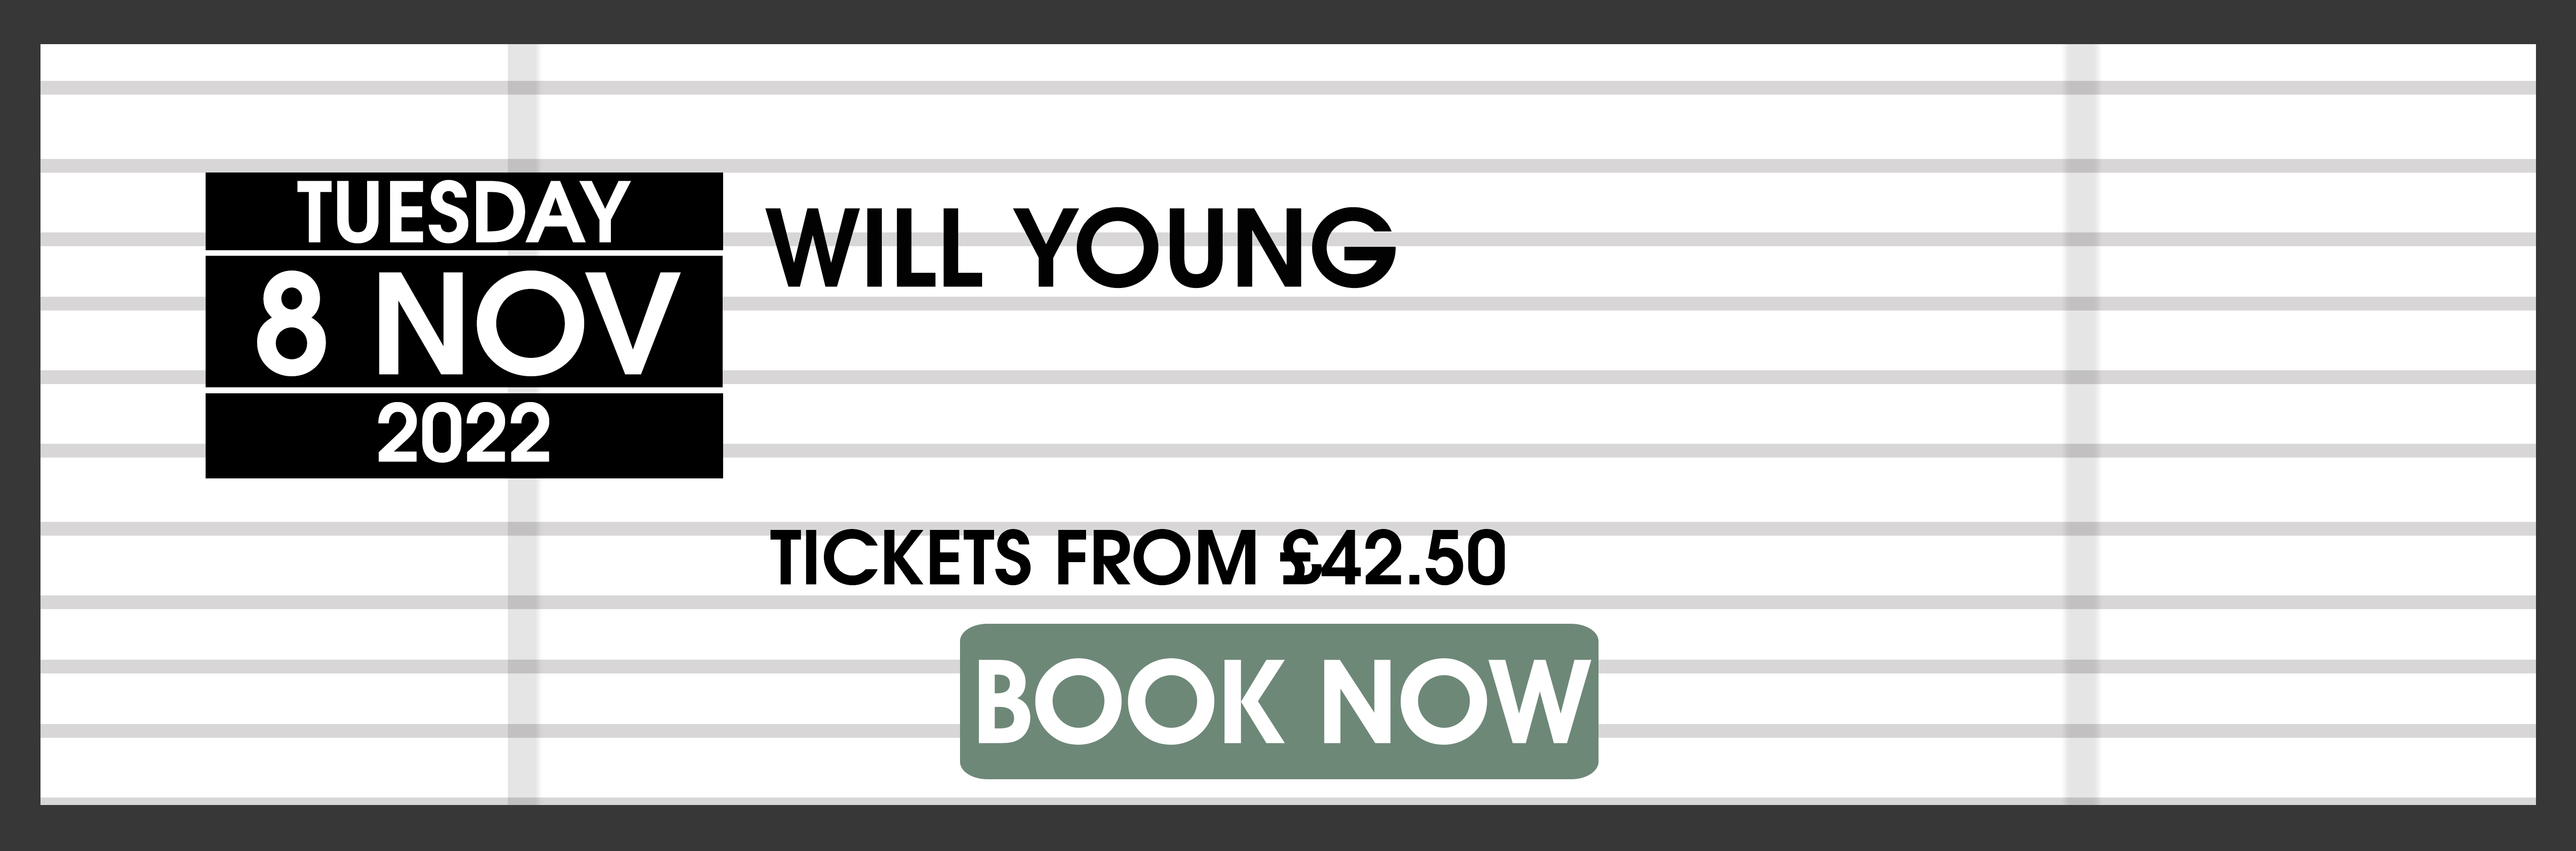 08.11.22 Will Young BOOK NOW